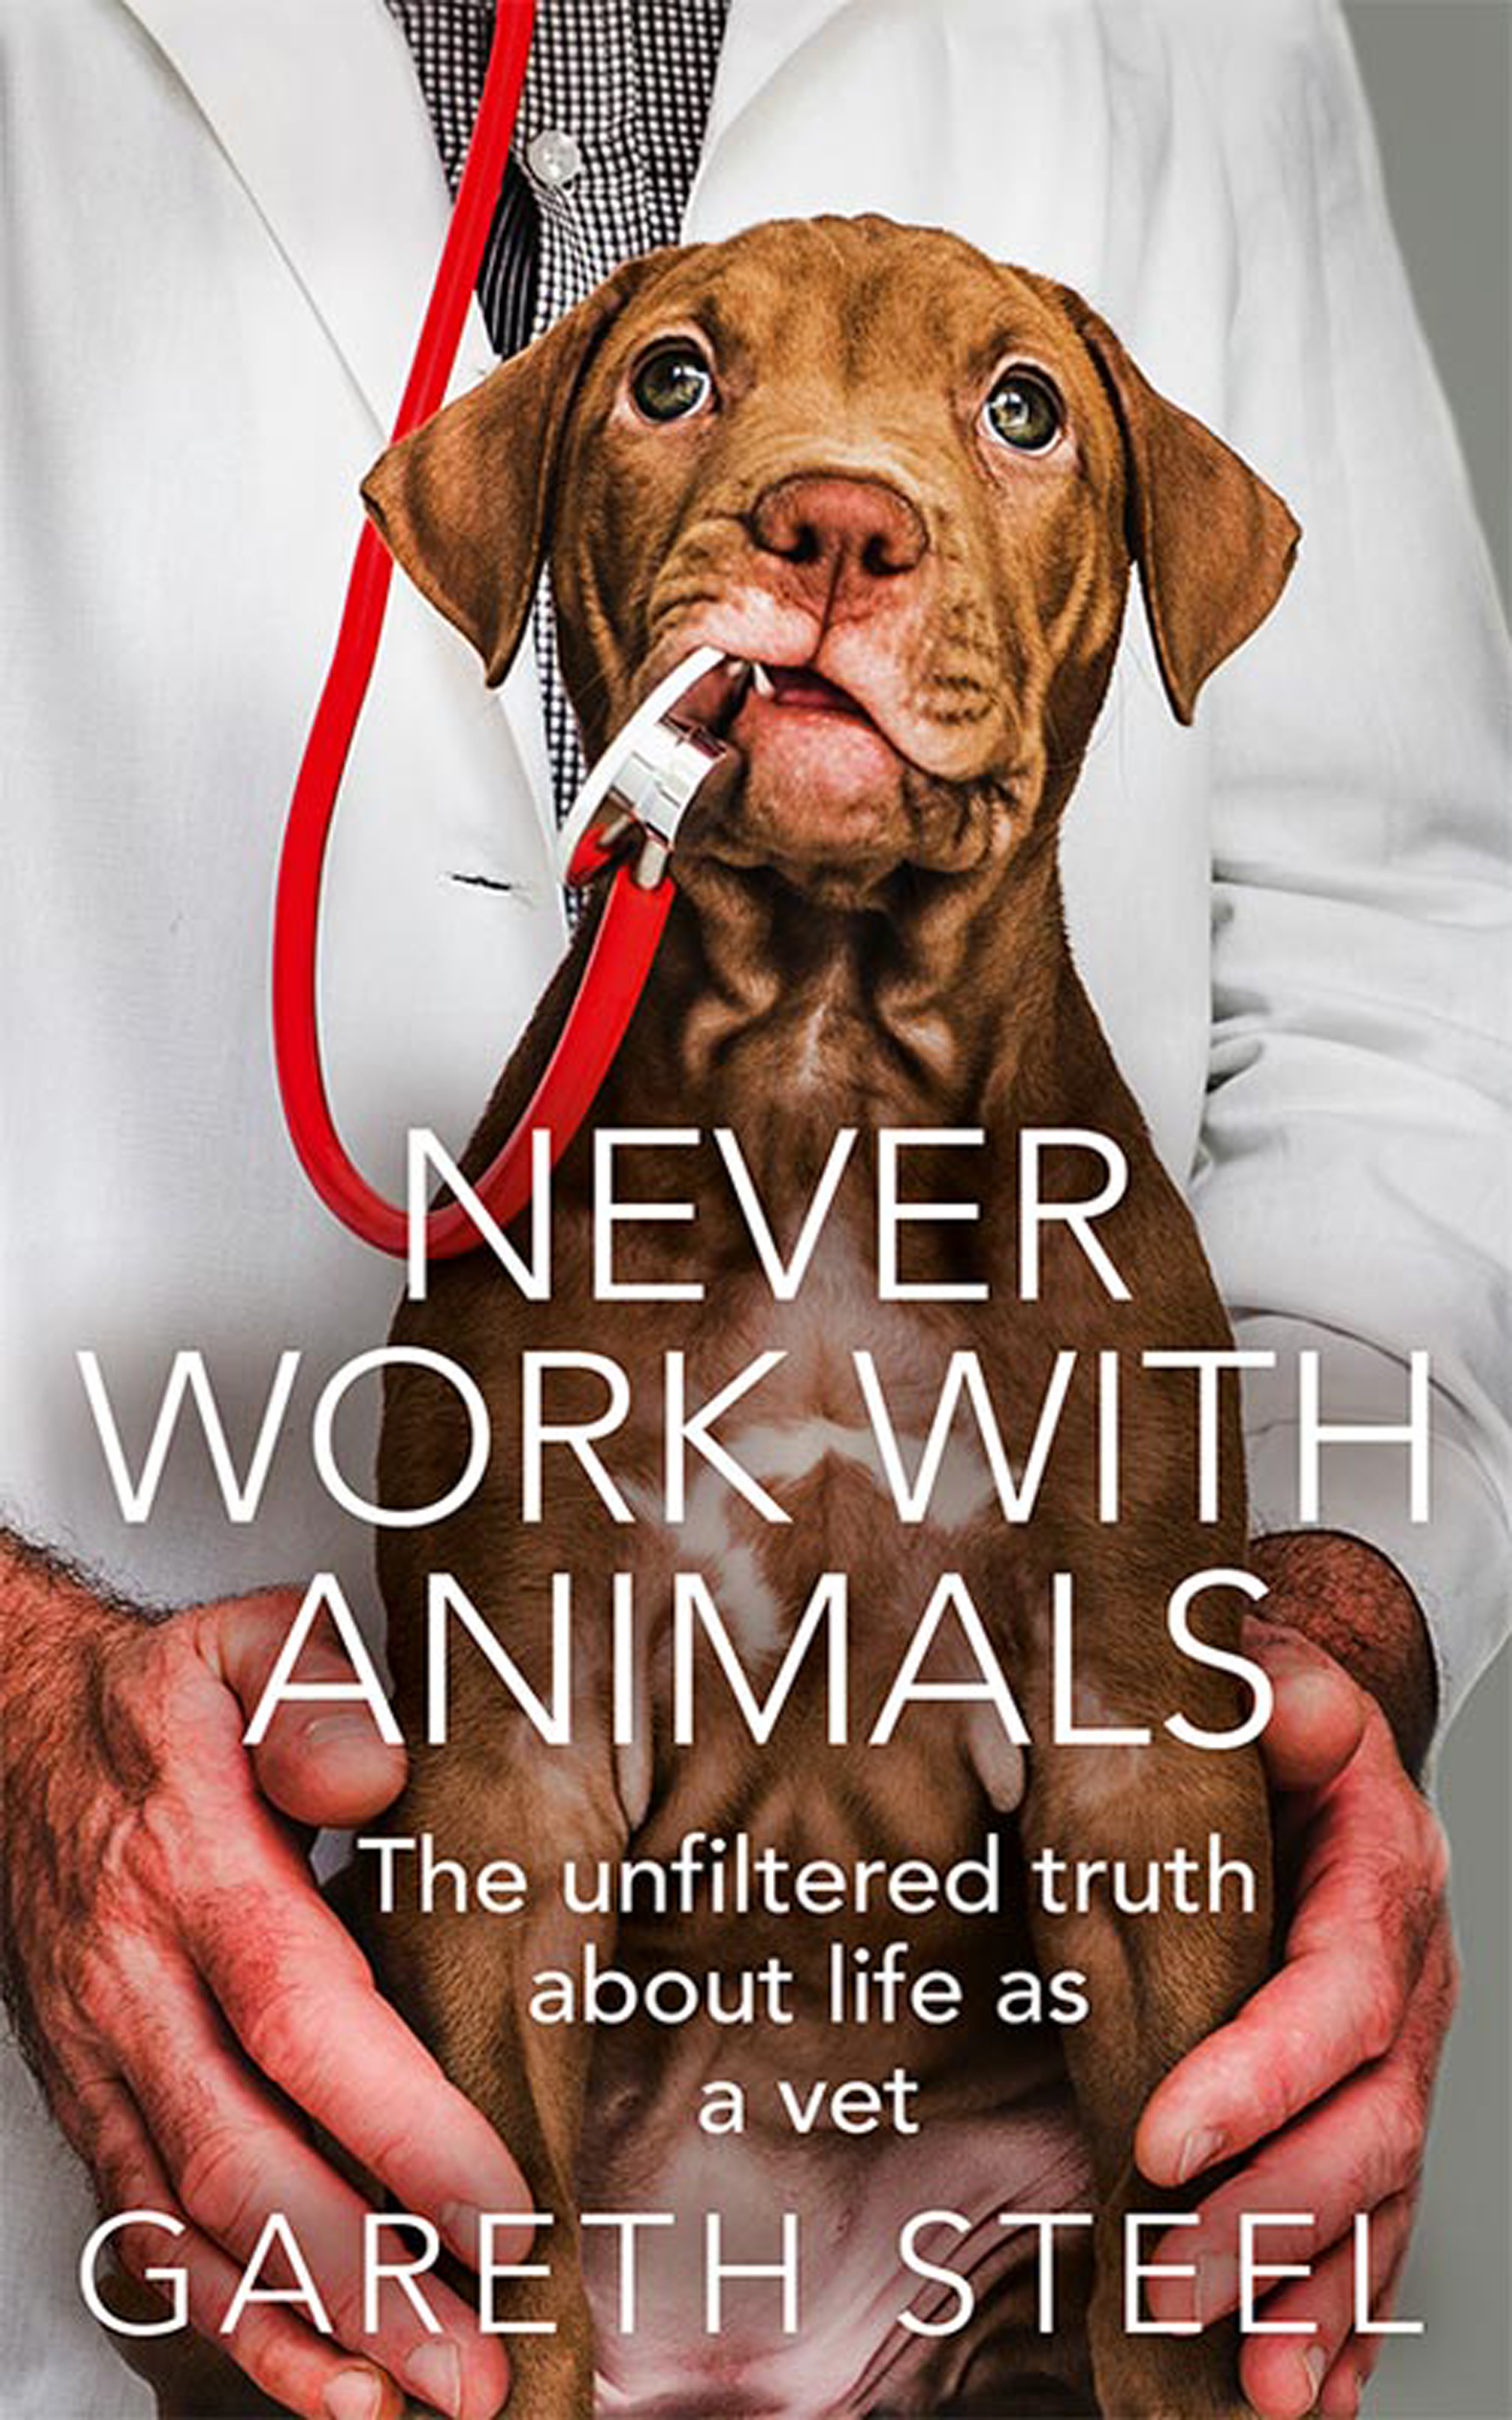 Book jacket of Never Work With Animals by Gareth Steel (HarperElement/PA)